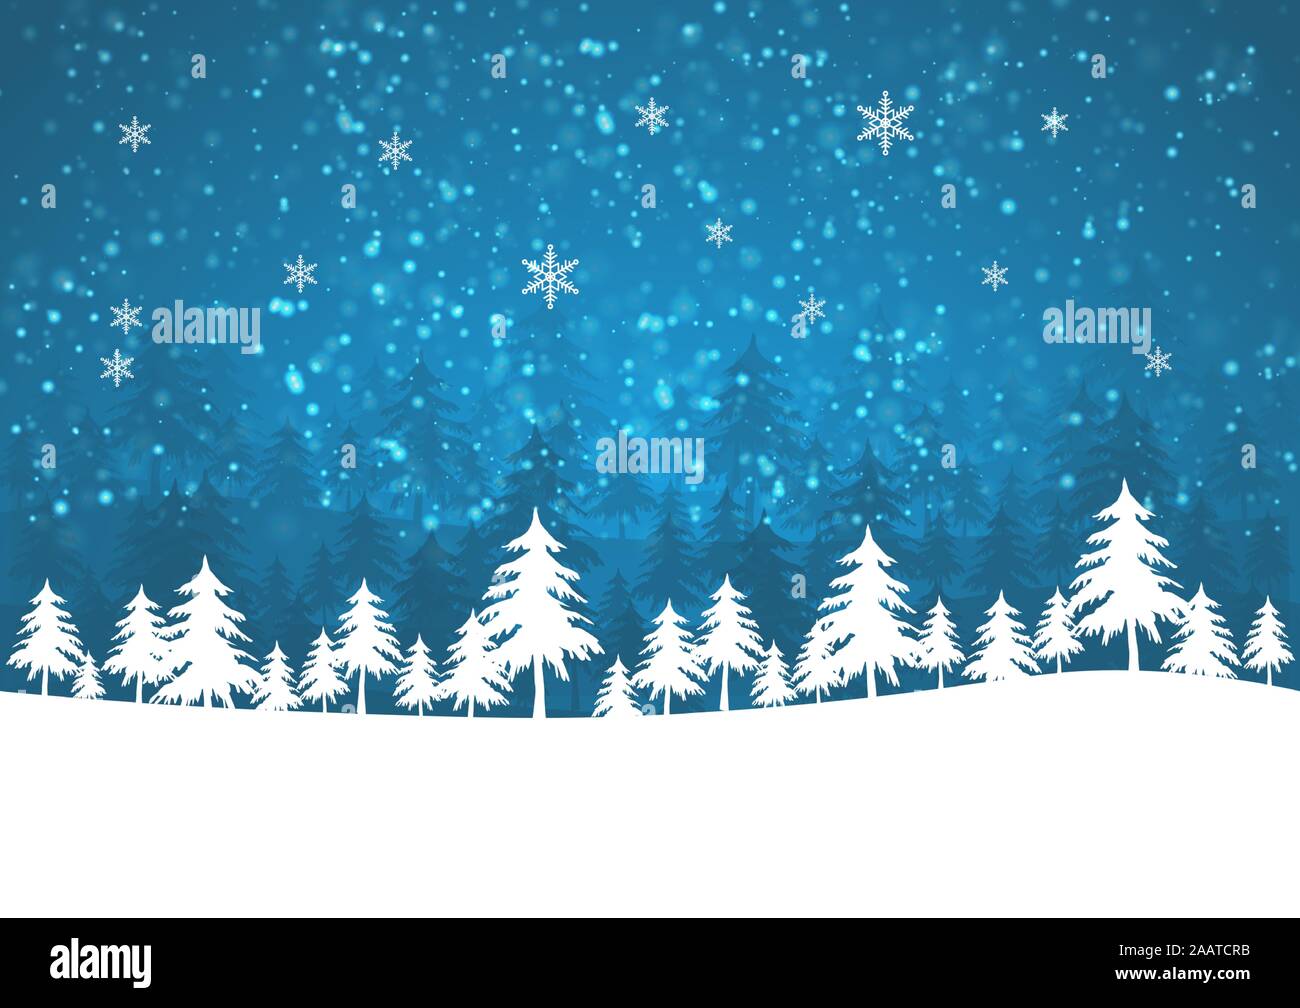 Holiday winter background for Merry Christmas, stock vector Stock Vector